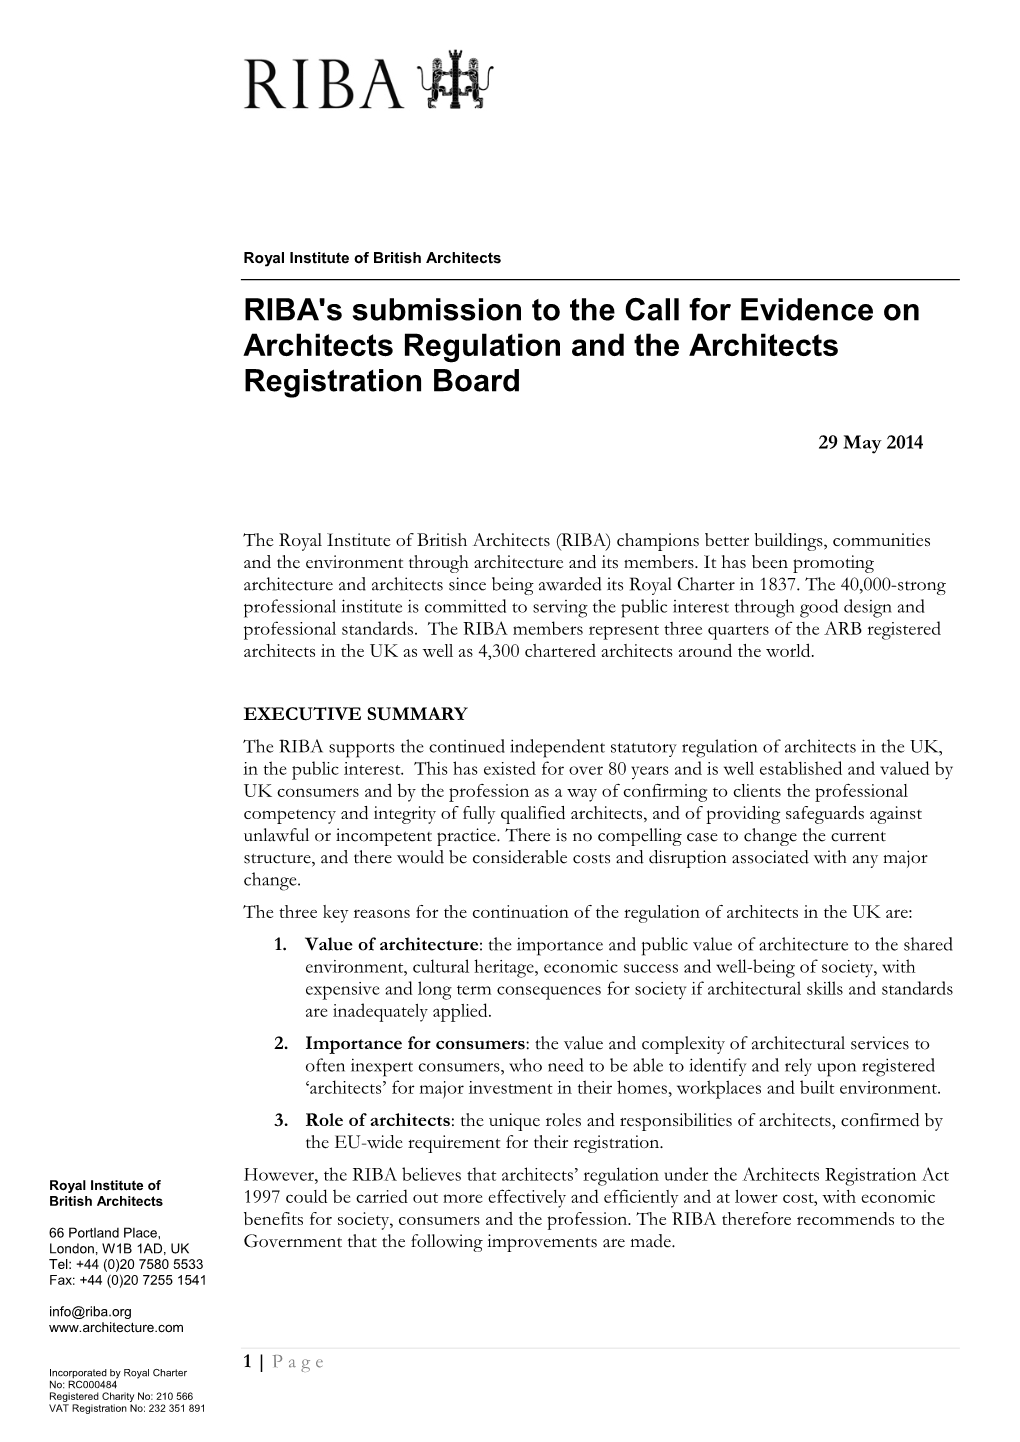 RIBA's Submission to the Call for Evidence on Architects Regulation and the Architects Registration Board